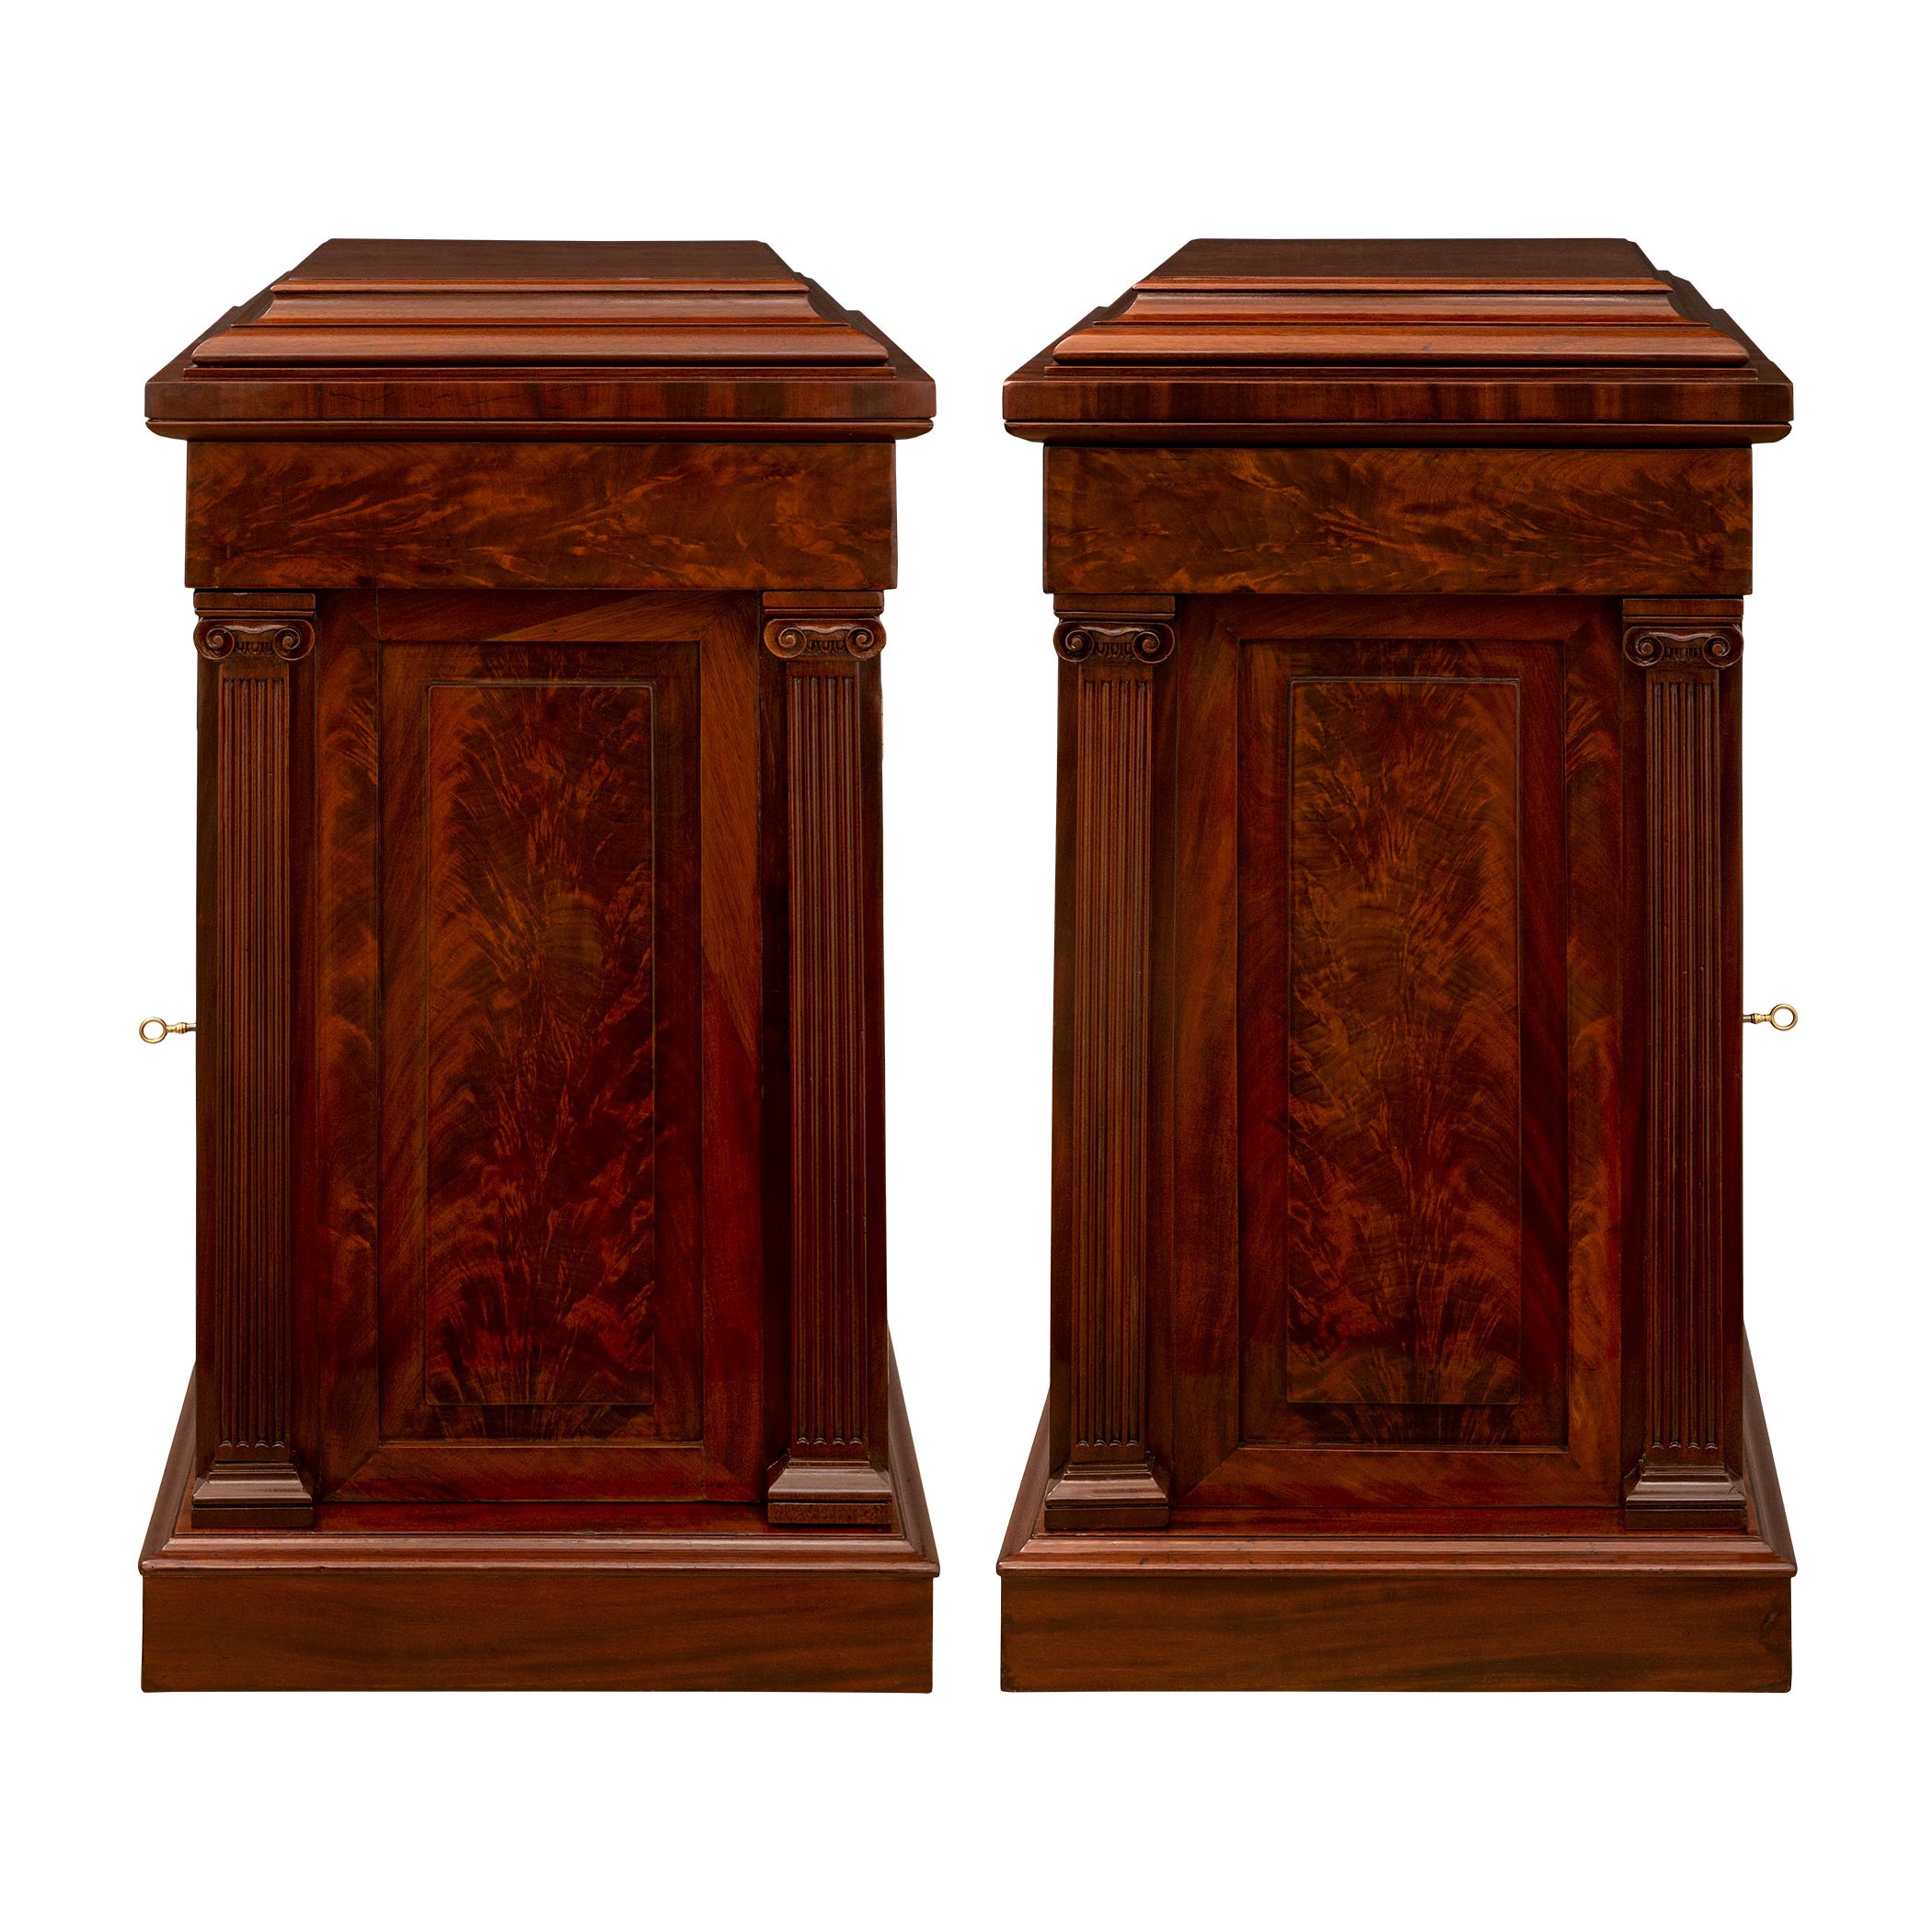 True Pair of English 19th Century Regency Period Flamed Mahogany Pedestals For Sale